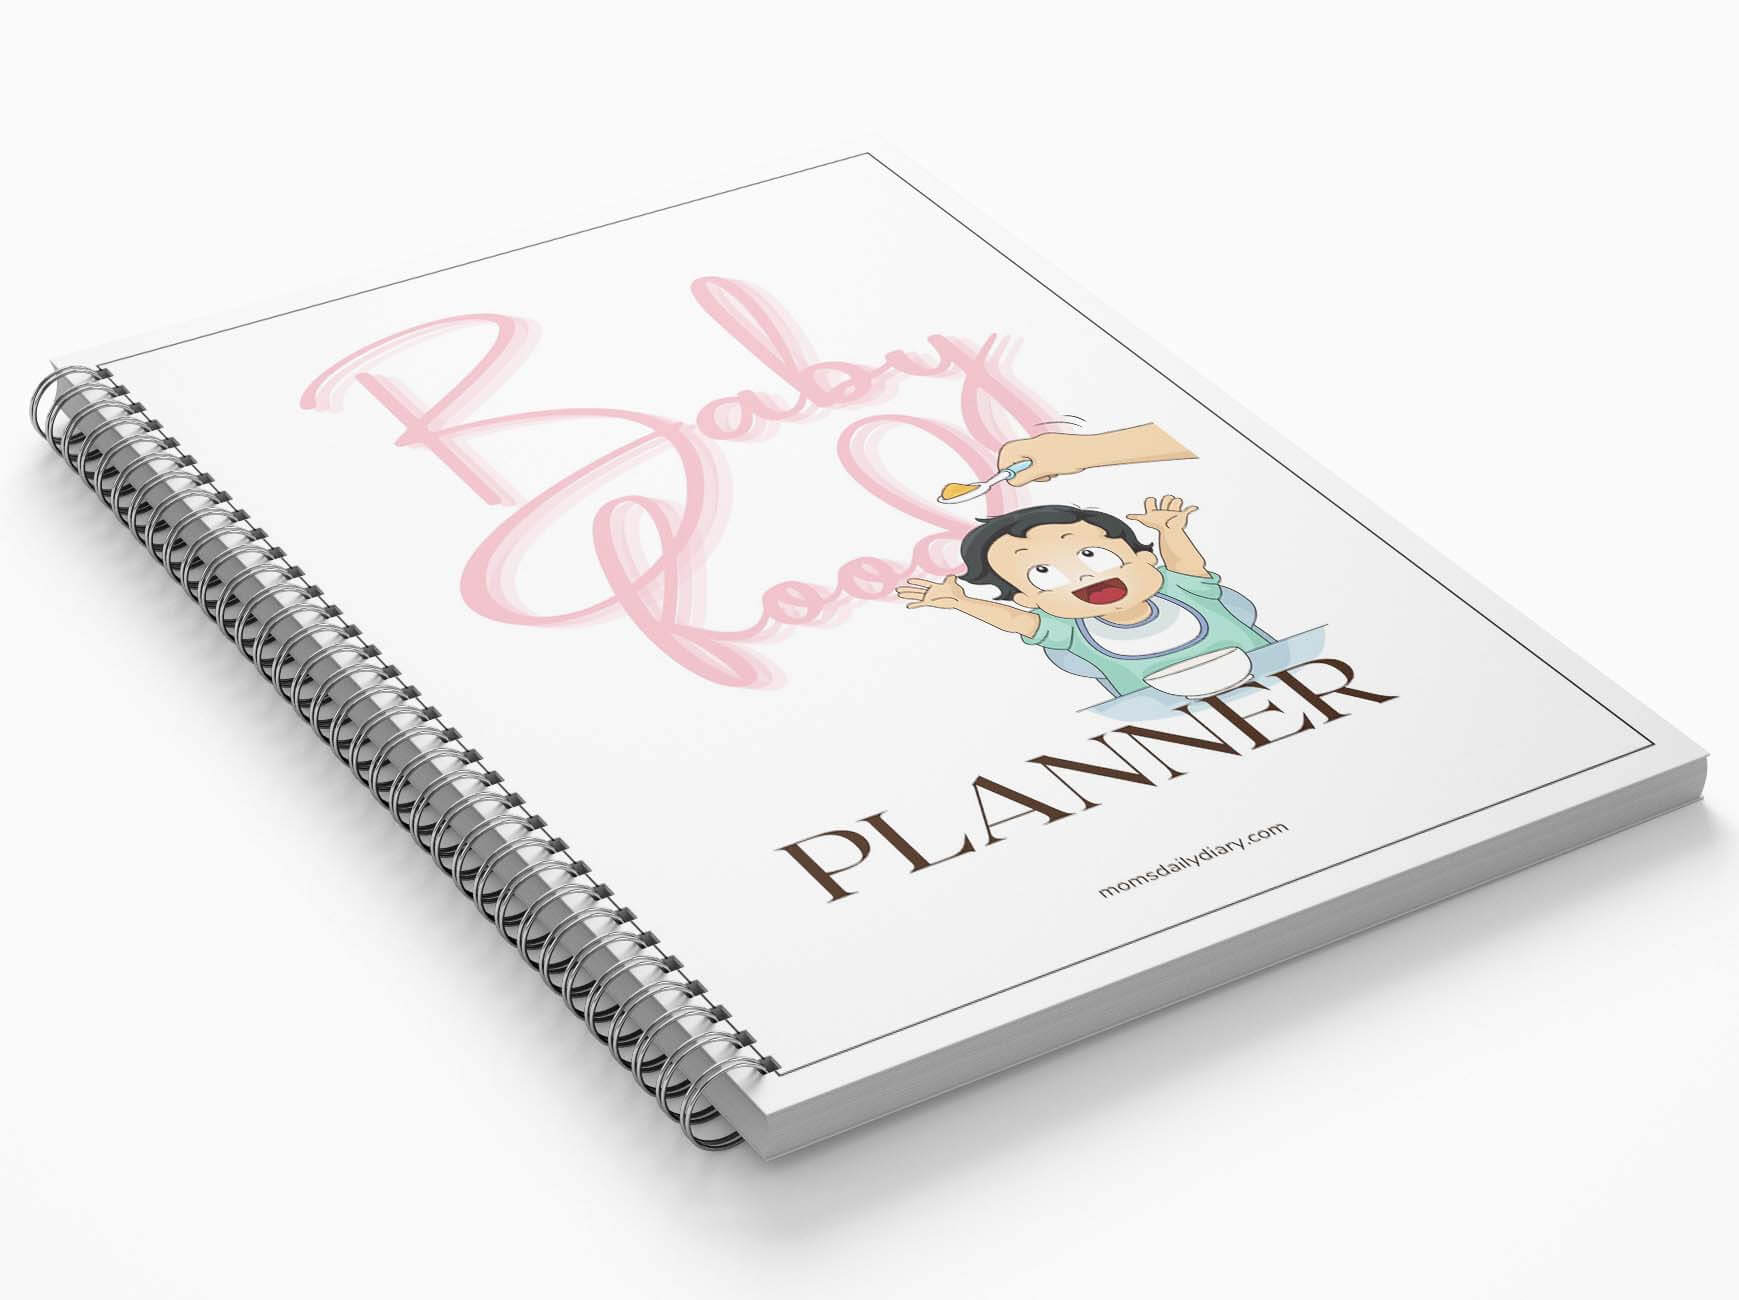 Promotional image of a spiral notepad with text Baby food planner and an illustration of a baby about to eat from a spoon.